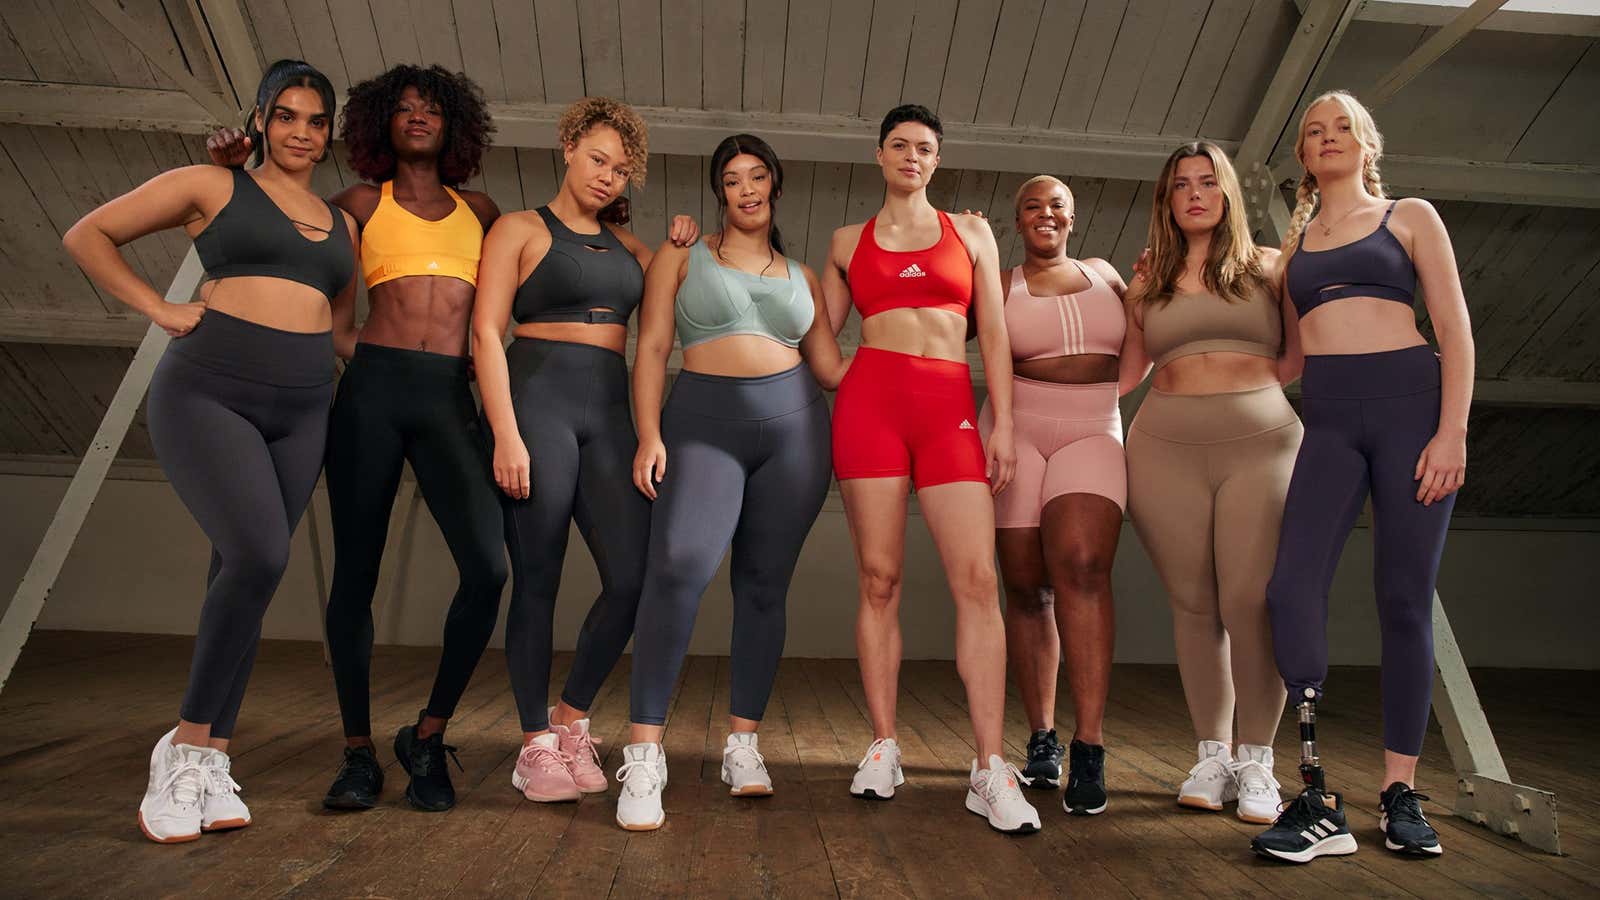 Adidas's sports bra ad celebrates breasts in all shapes and sizes